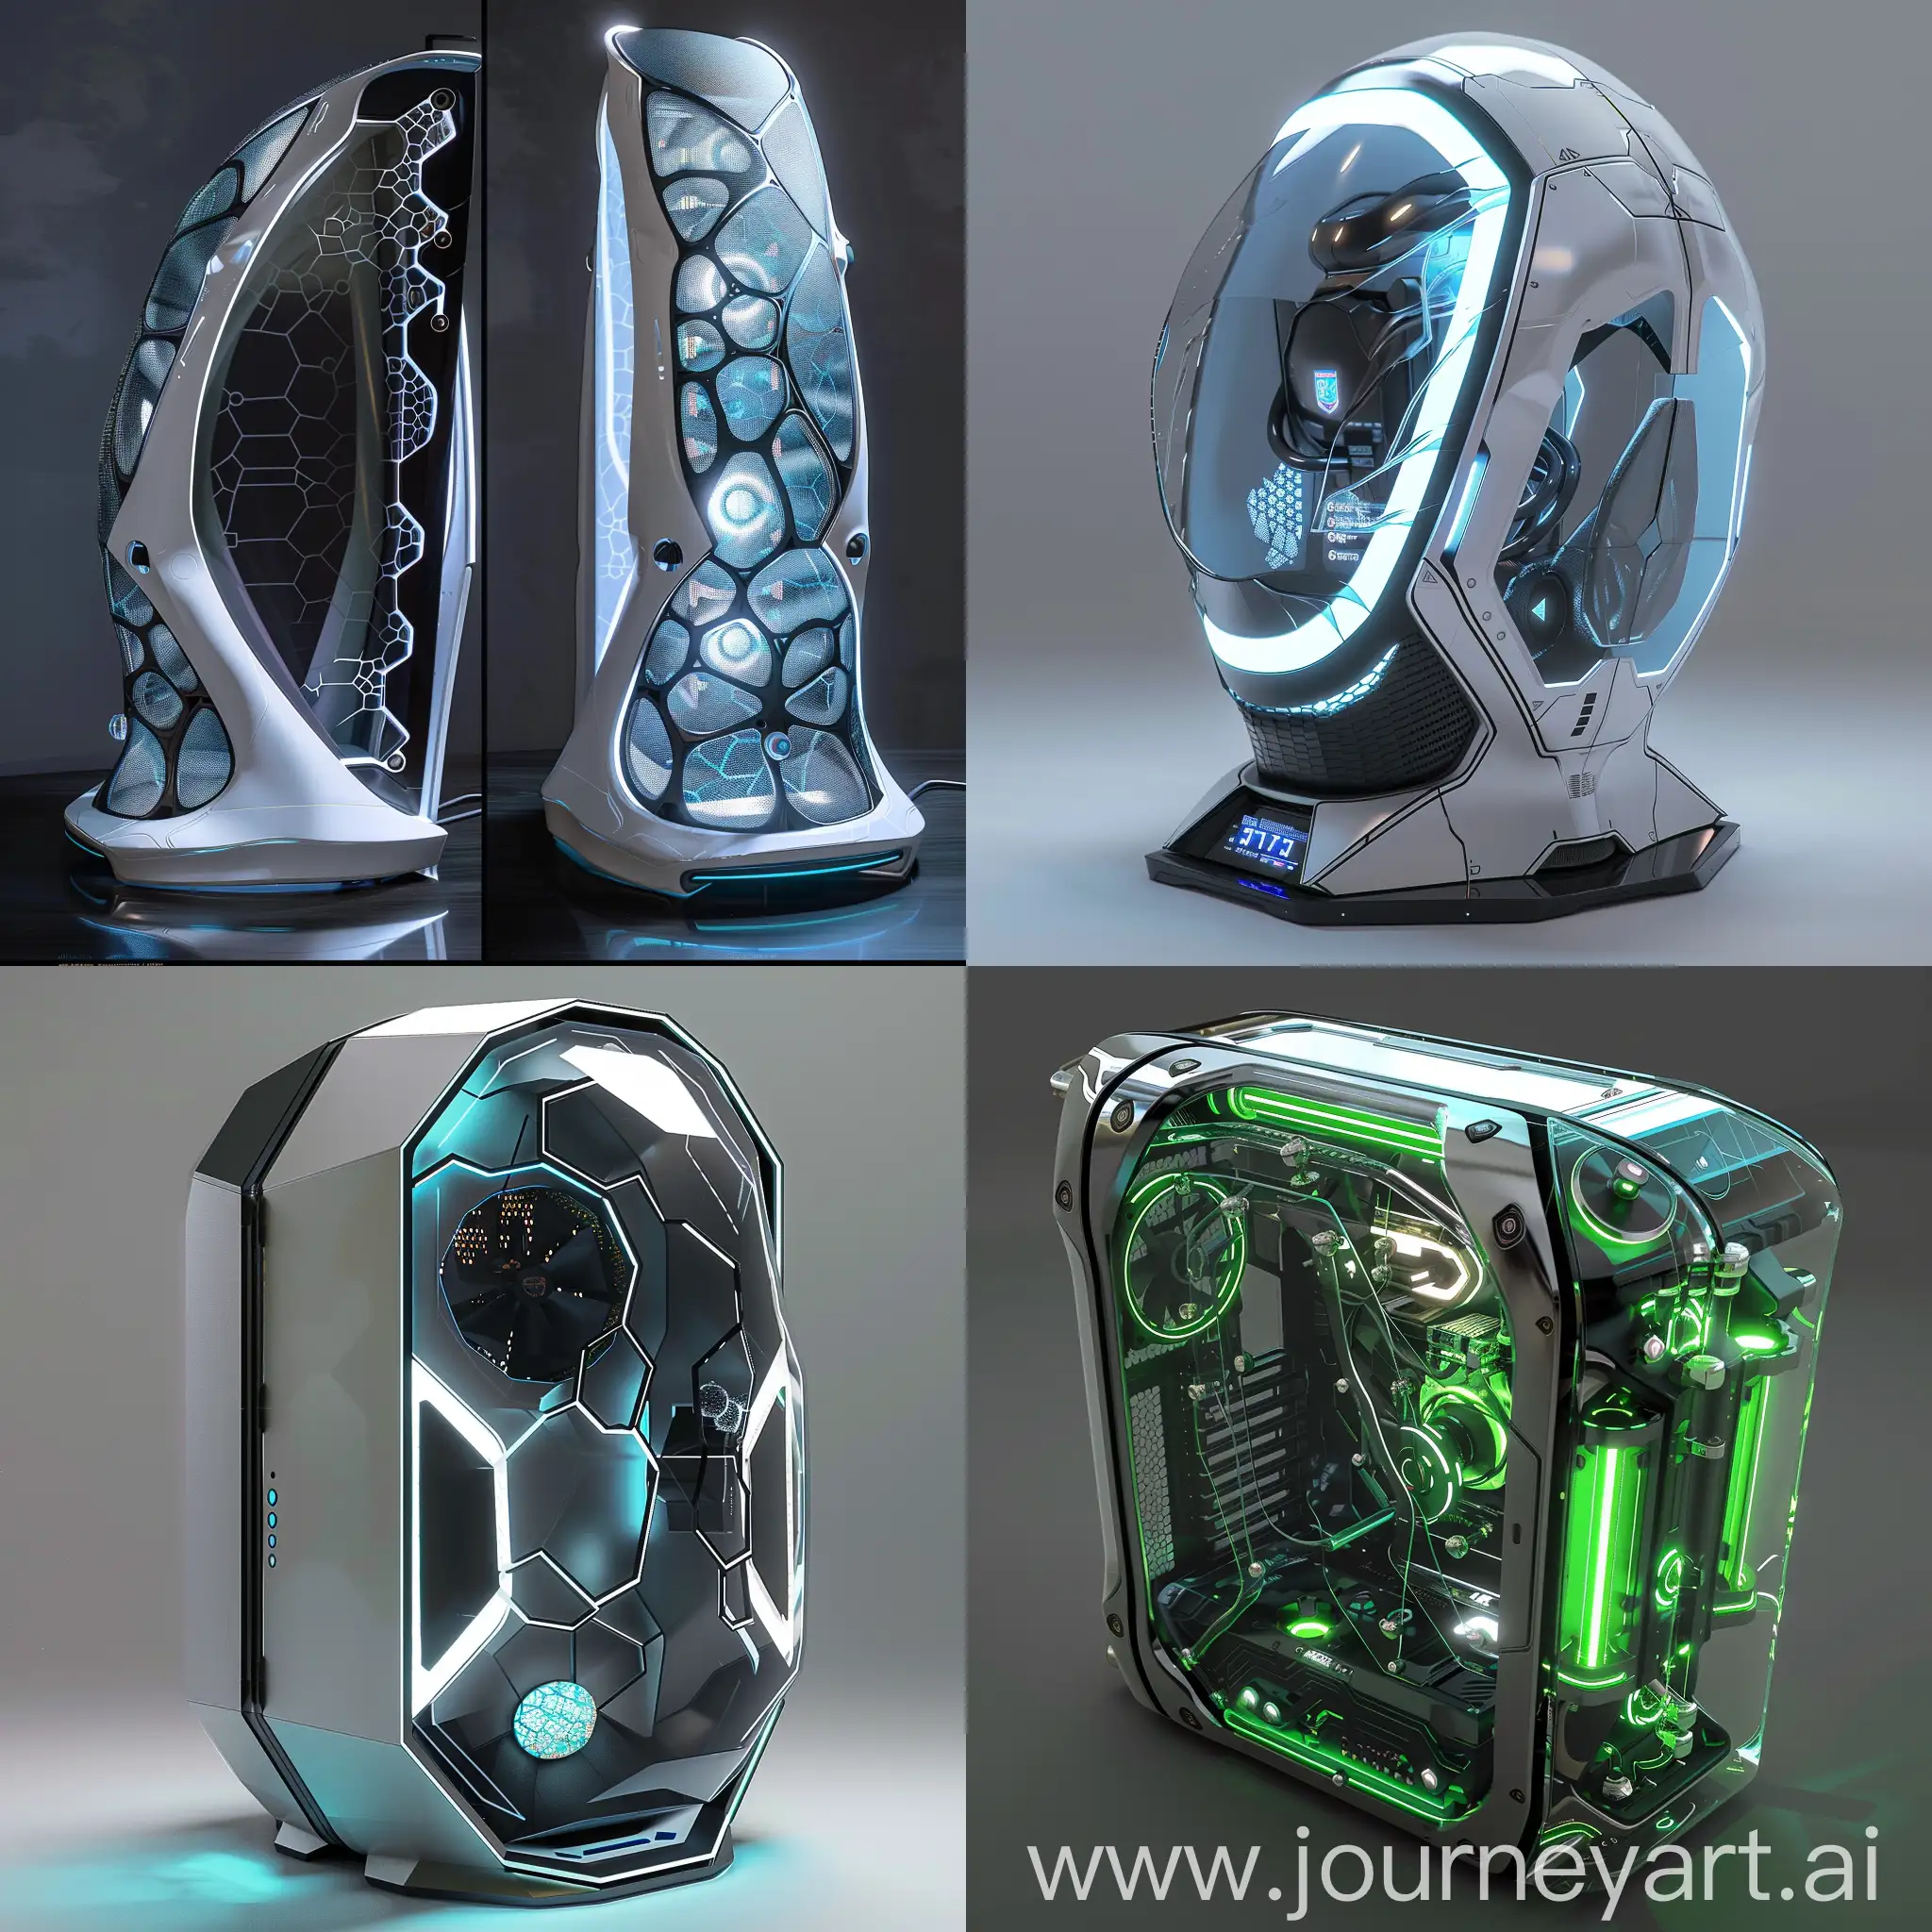 Futuristic-Modular-PC-Case-with-Transparent-Panels-and-Integrated-Liquid-Cooling